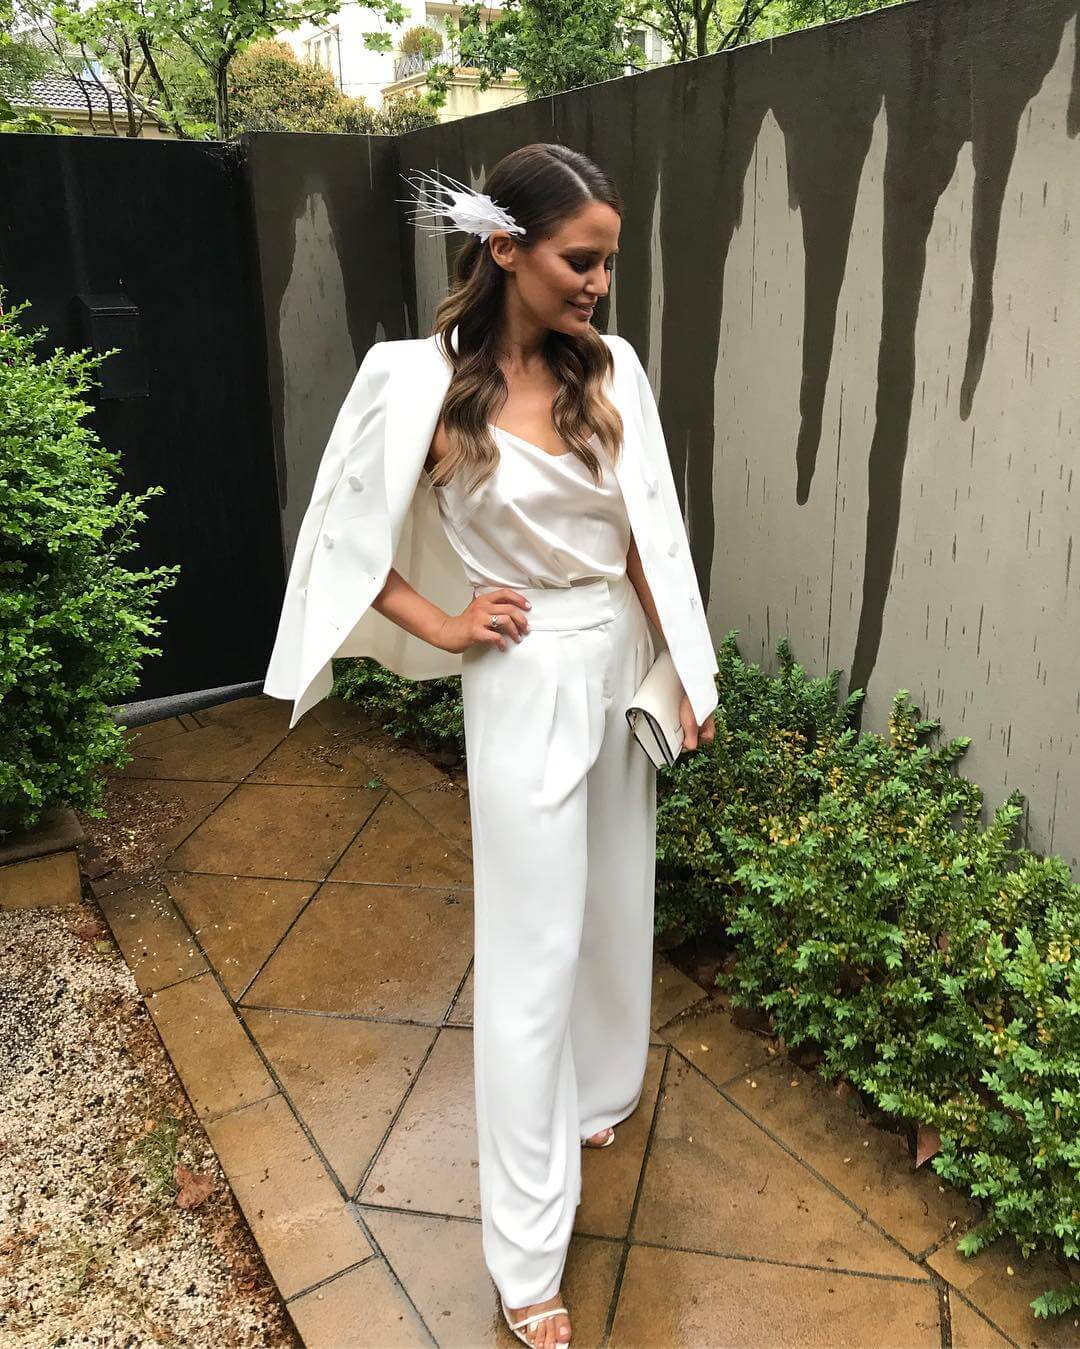 49 Hot Pictures Of Jodi Anasta Which Will Make You Drool For Her | Best Of Comic Books